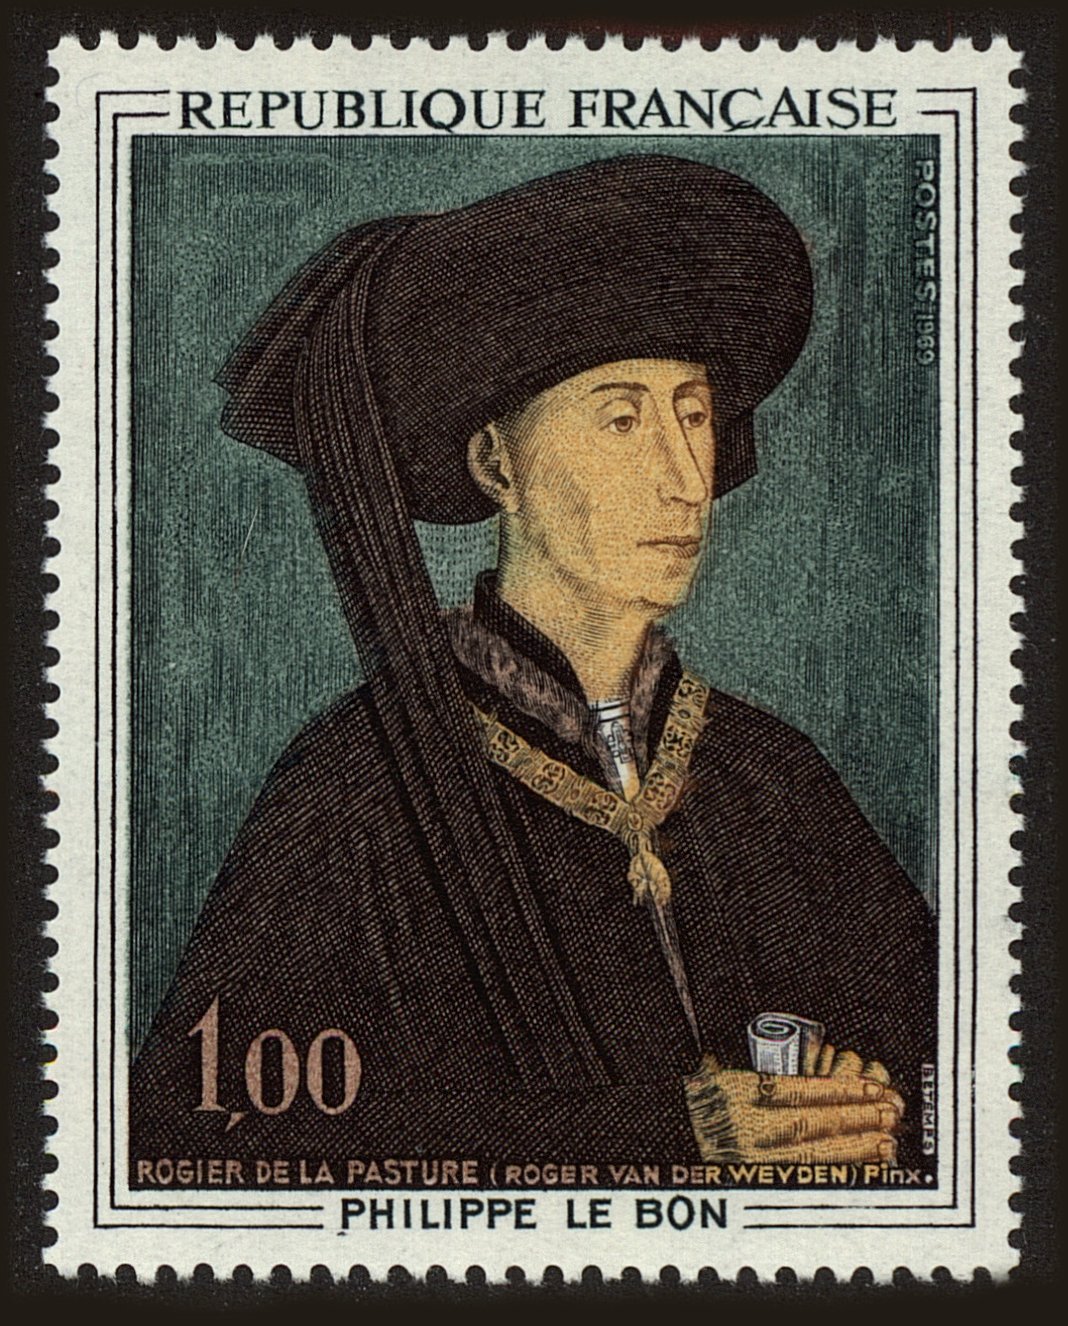 Front view of France 1237 collectors stamp